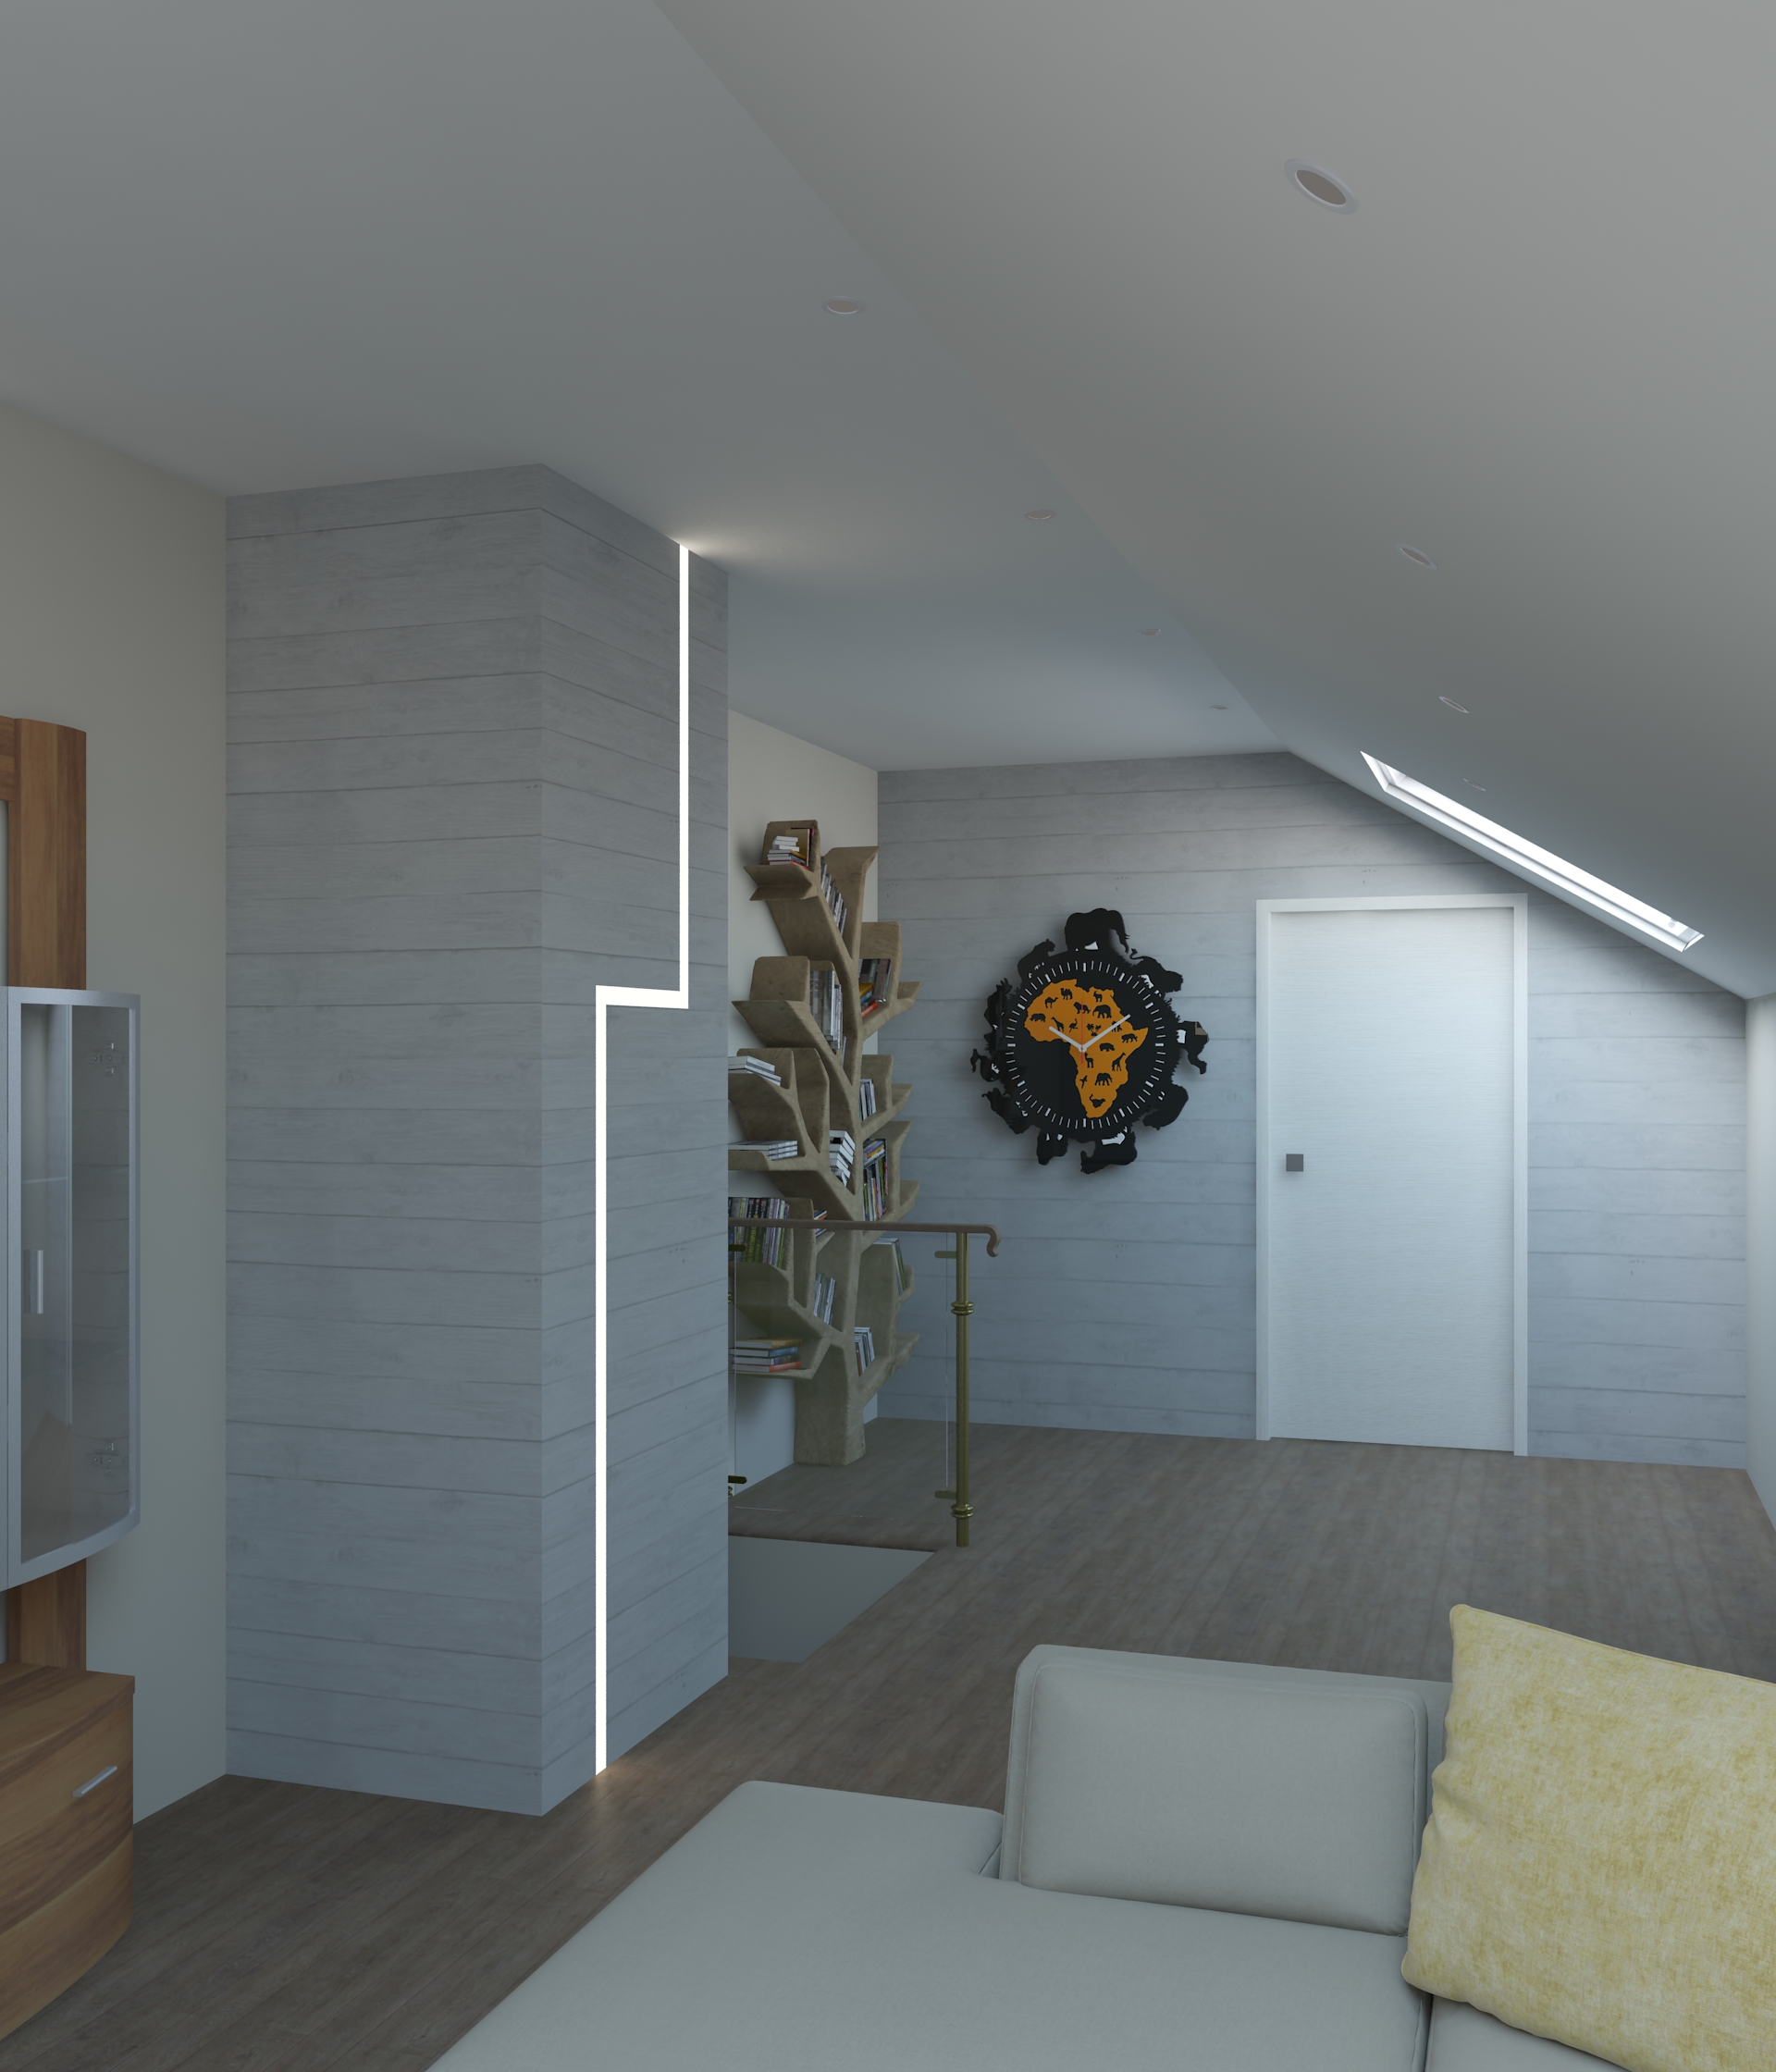 Lounge under the roof in 3d max vray 3.0 image